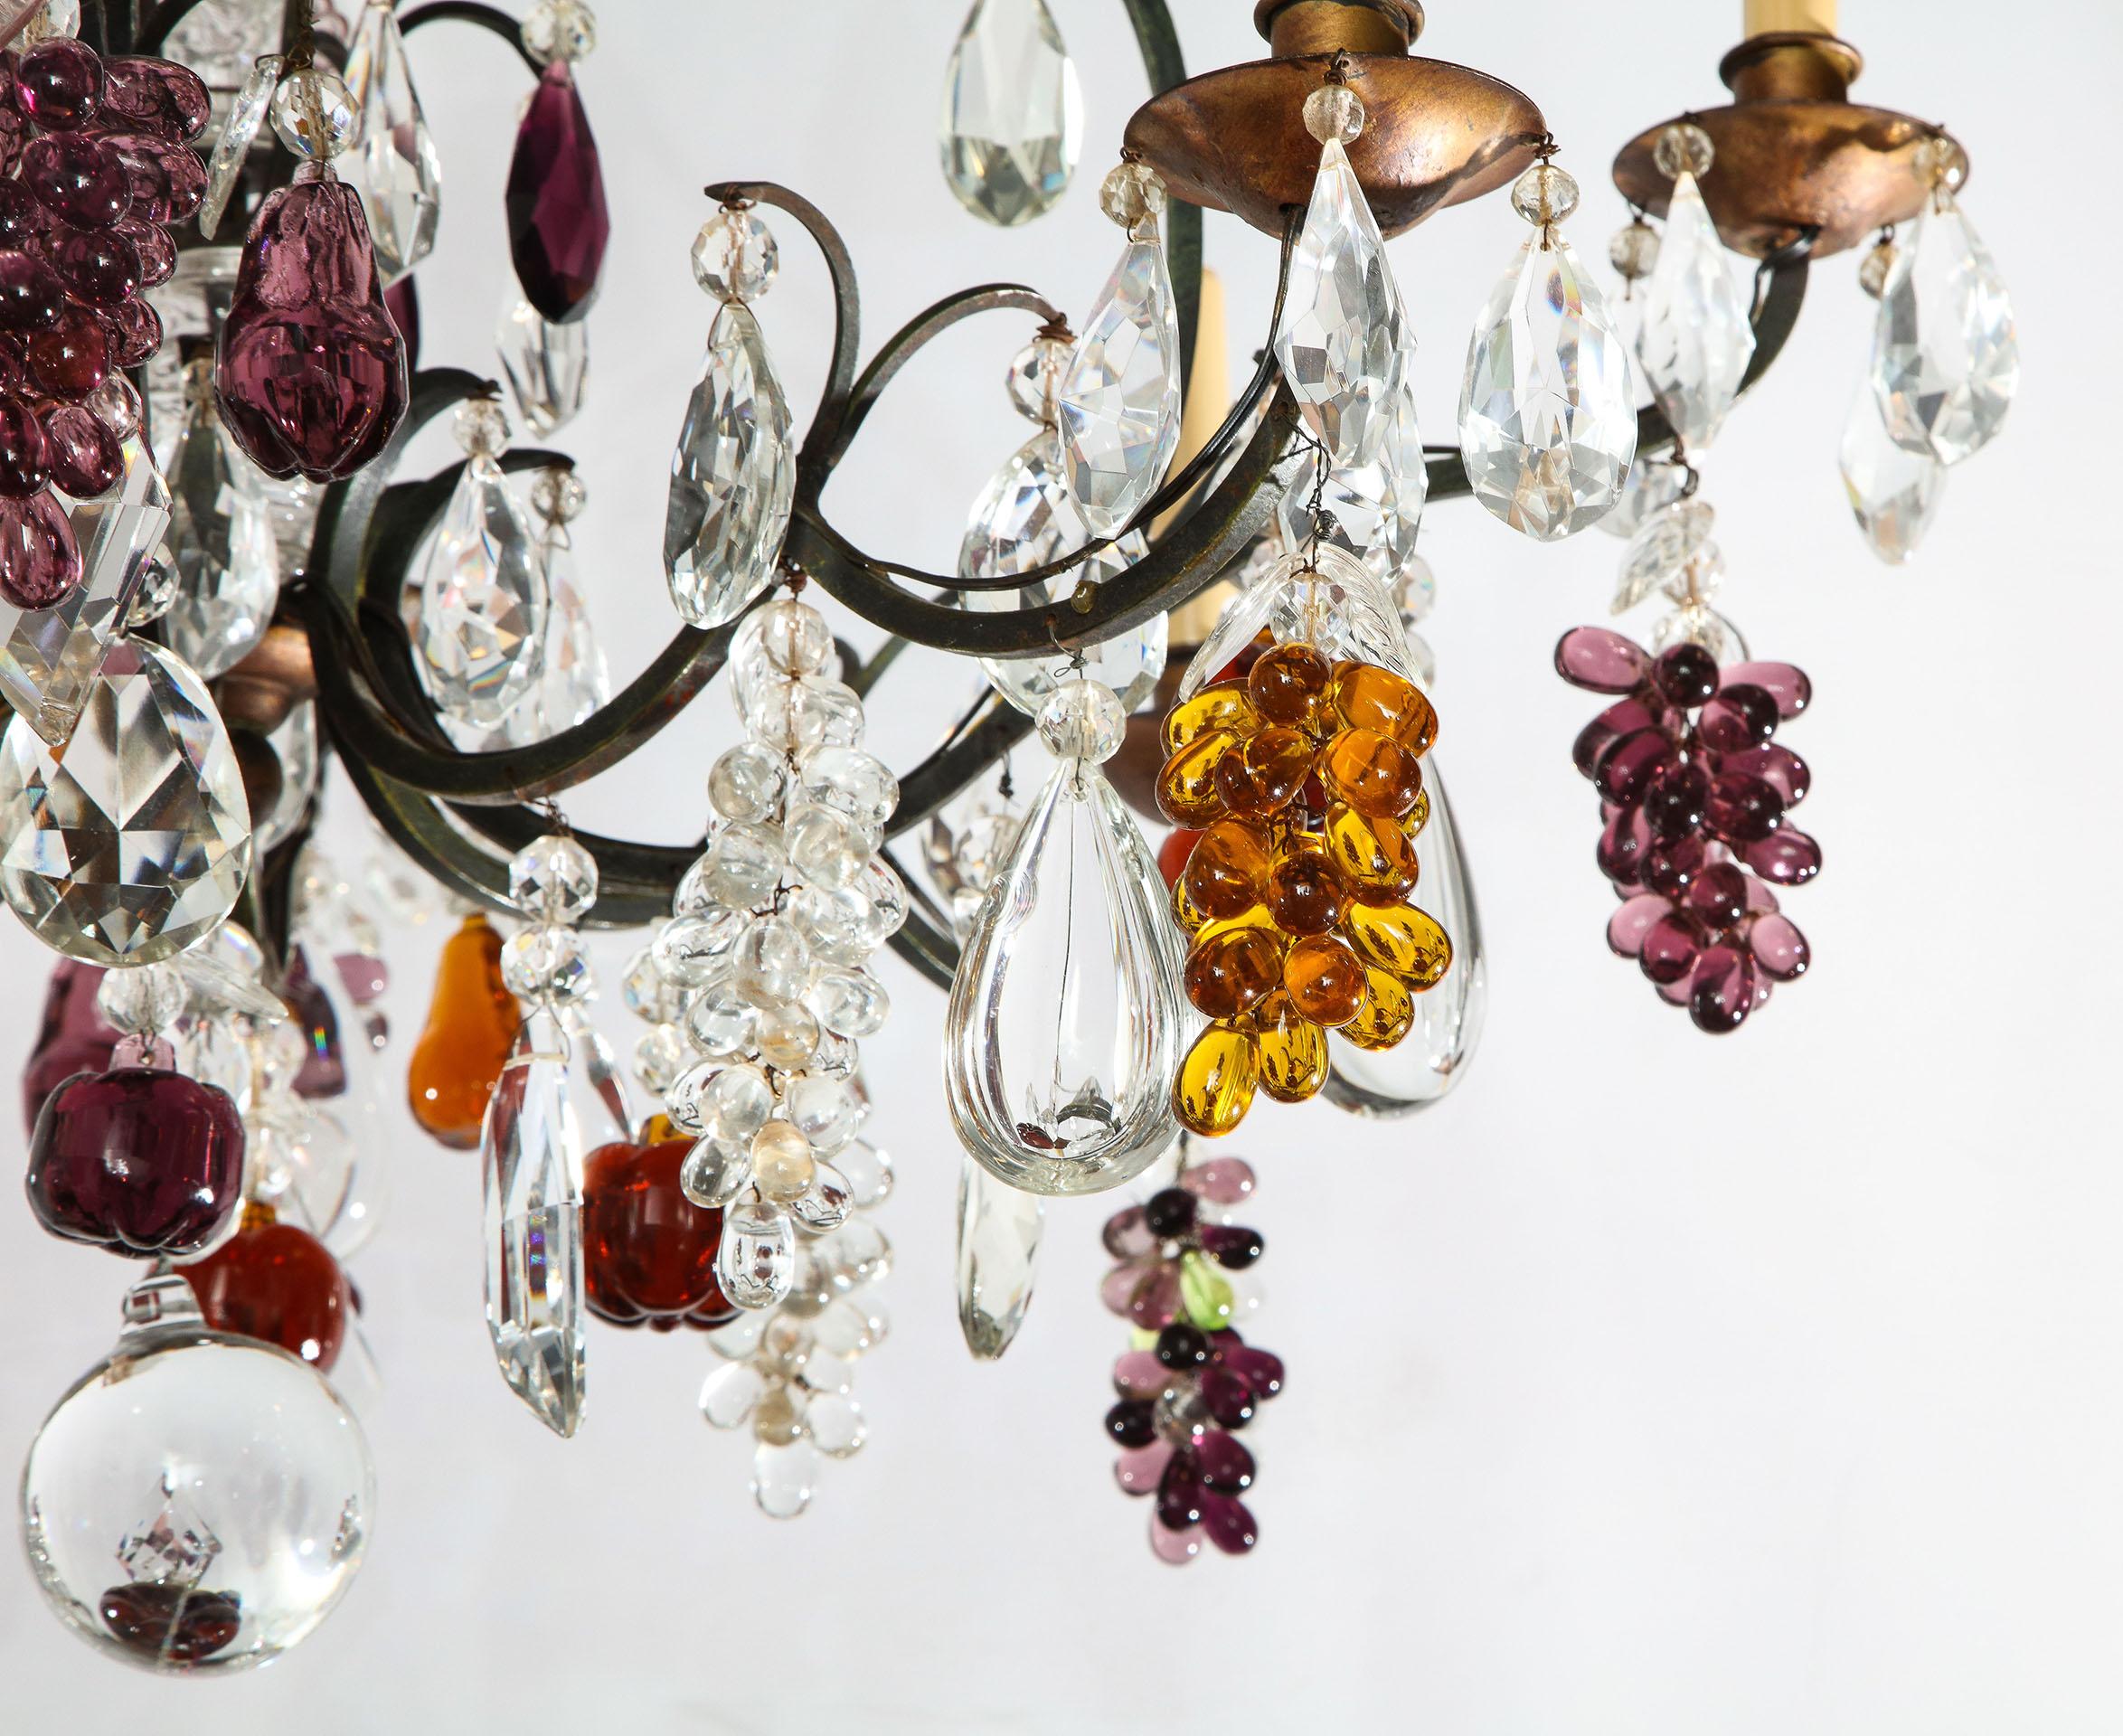 French eight-light chandelier with colored fruit pendants (Possibly Baccarat)

The eight-light chandelier having a canopy with several metal arms supporting clear drops, amber pears, amethyst apples and grapes, along with clear grapes and leaves